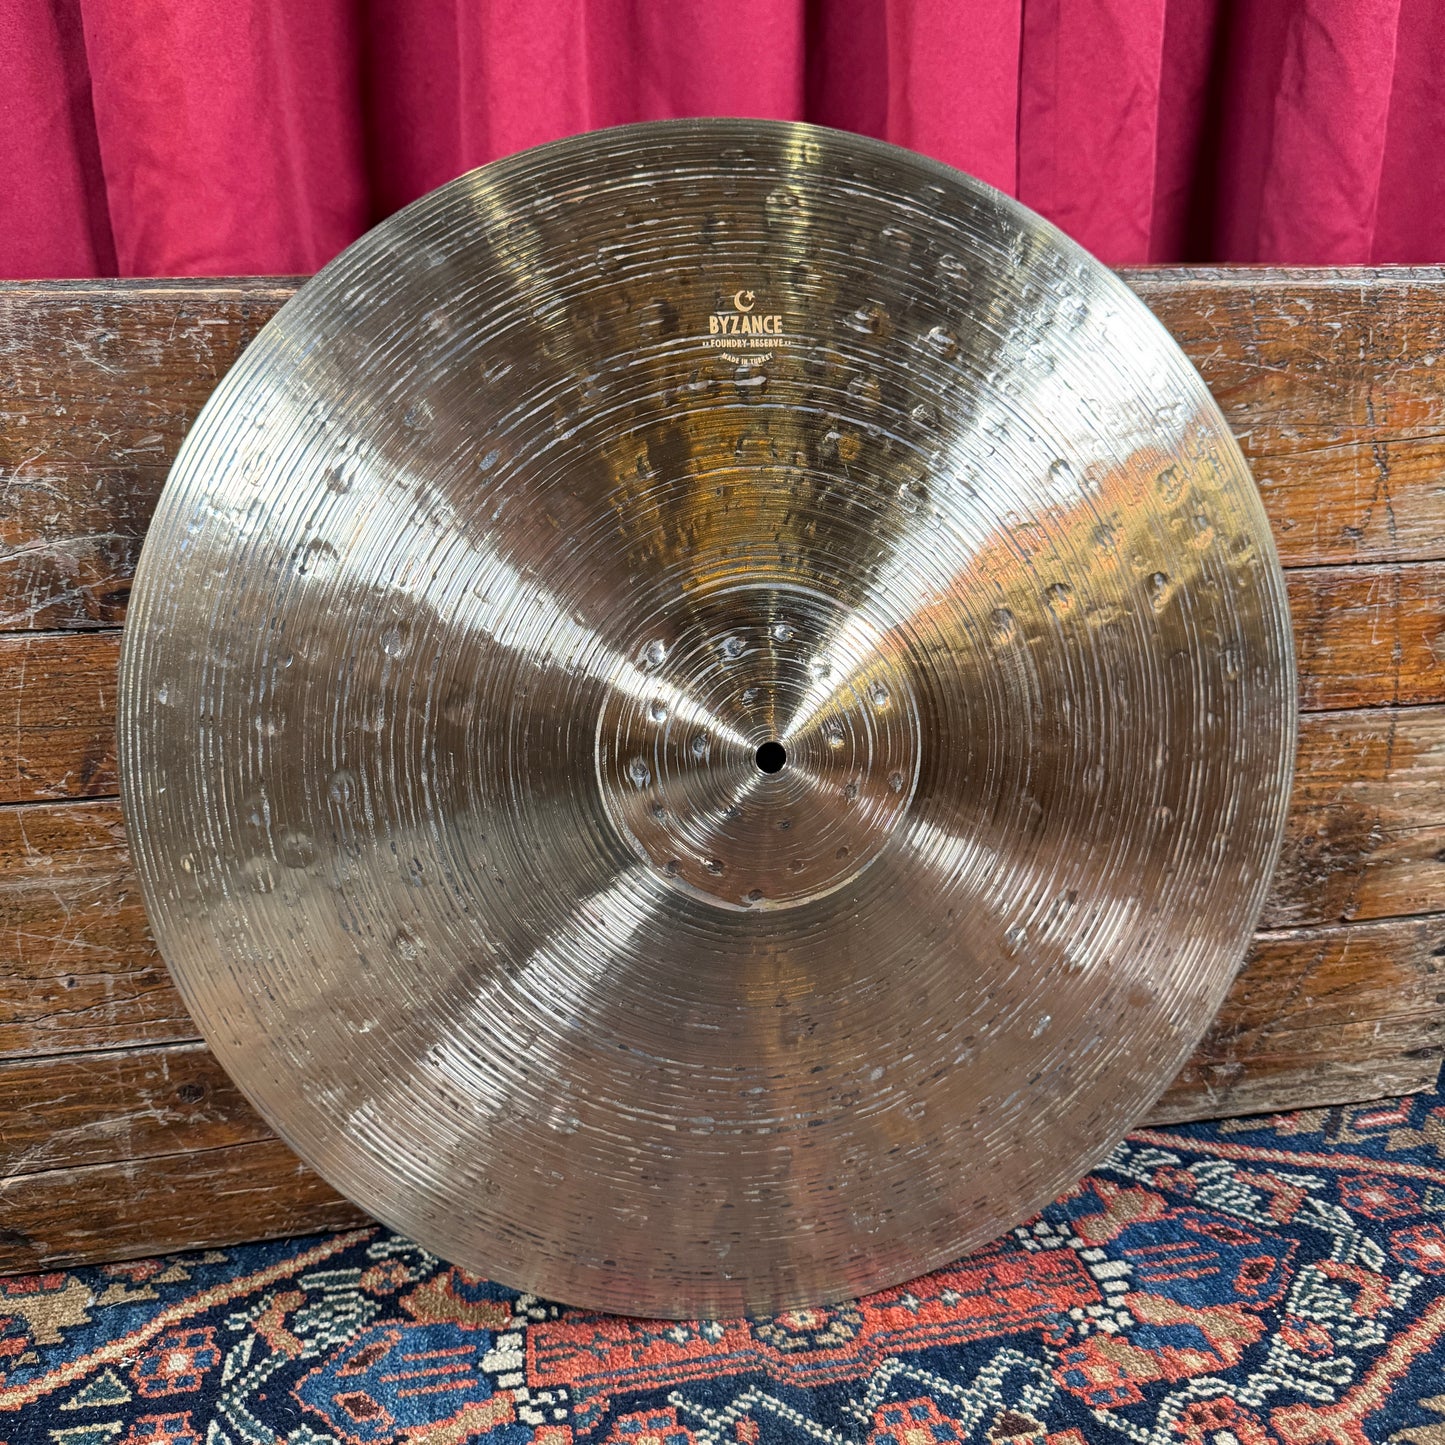 20" Meinl Byzance Foundry Reserve Ride Cymbal 2135g *Video Demo*